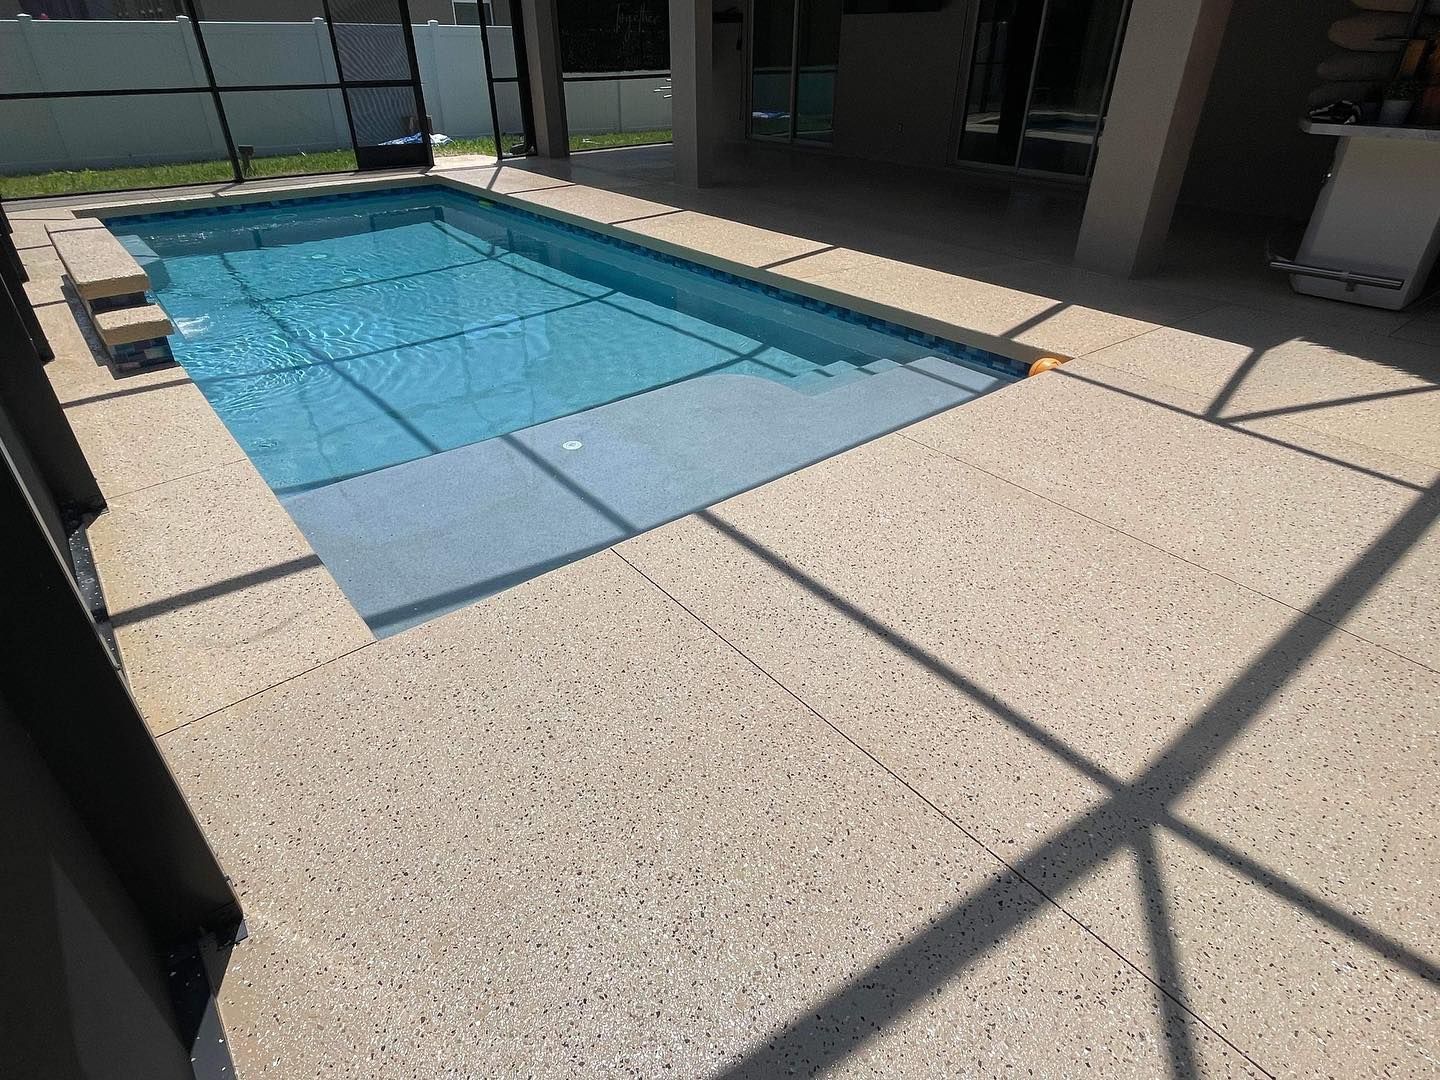 Concrete pool deck coating with warm brown, tan and black flake colors next to a sparkling blue pool